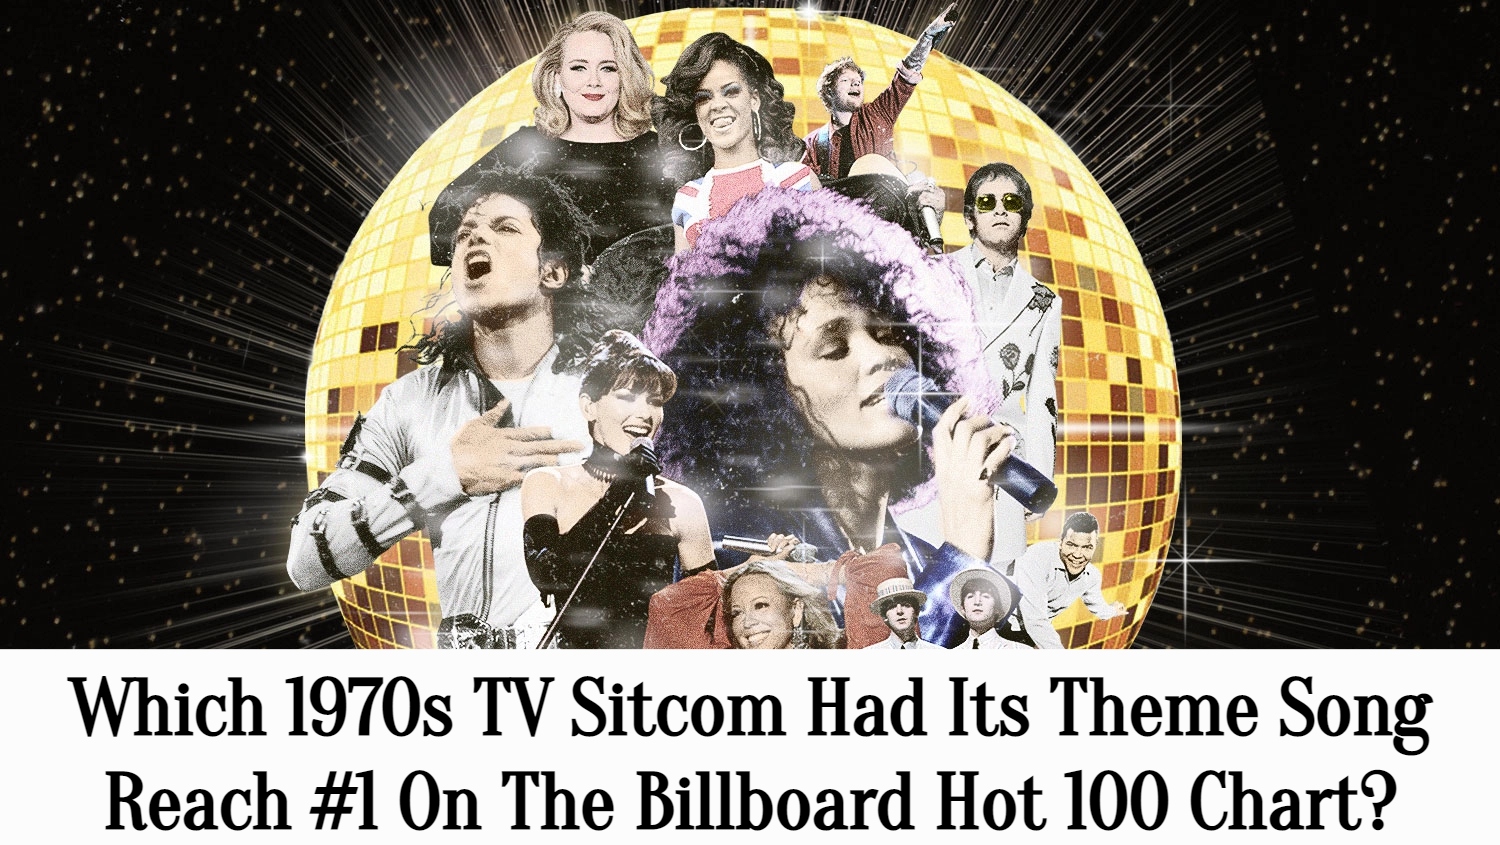 Which 1970s TV Sitcom Had Its Theme Song Reach #1 On The Billboard Hot 100 Chart?